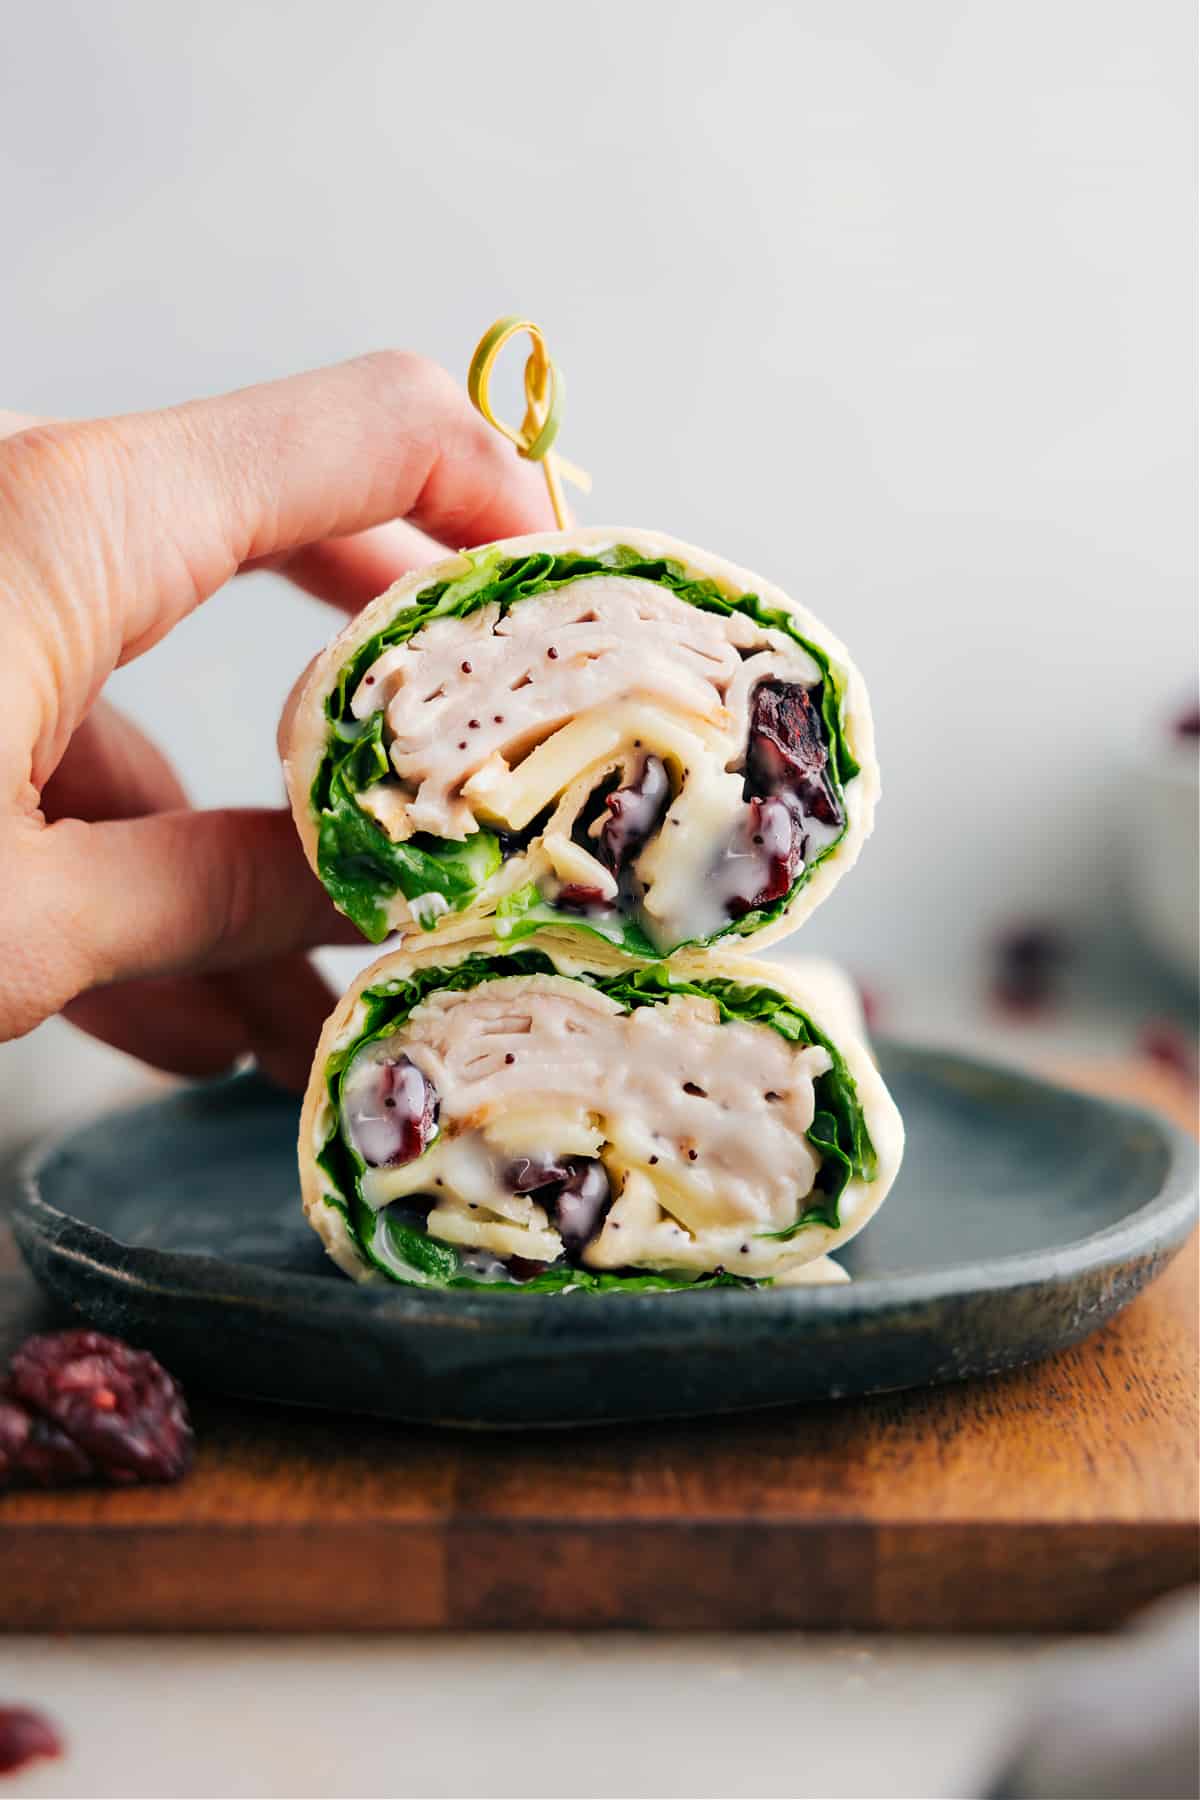 The turkey cranberry wraps stacked on top of each other ready to be enjoyed.